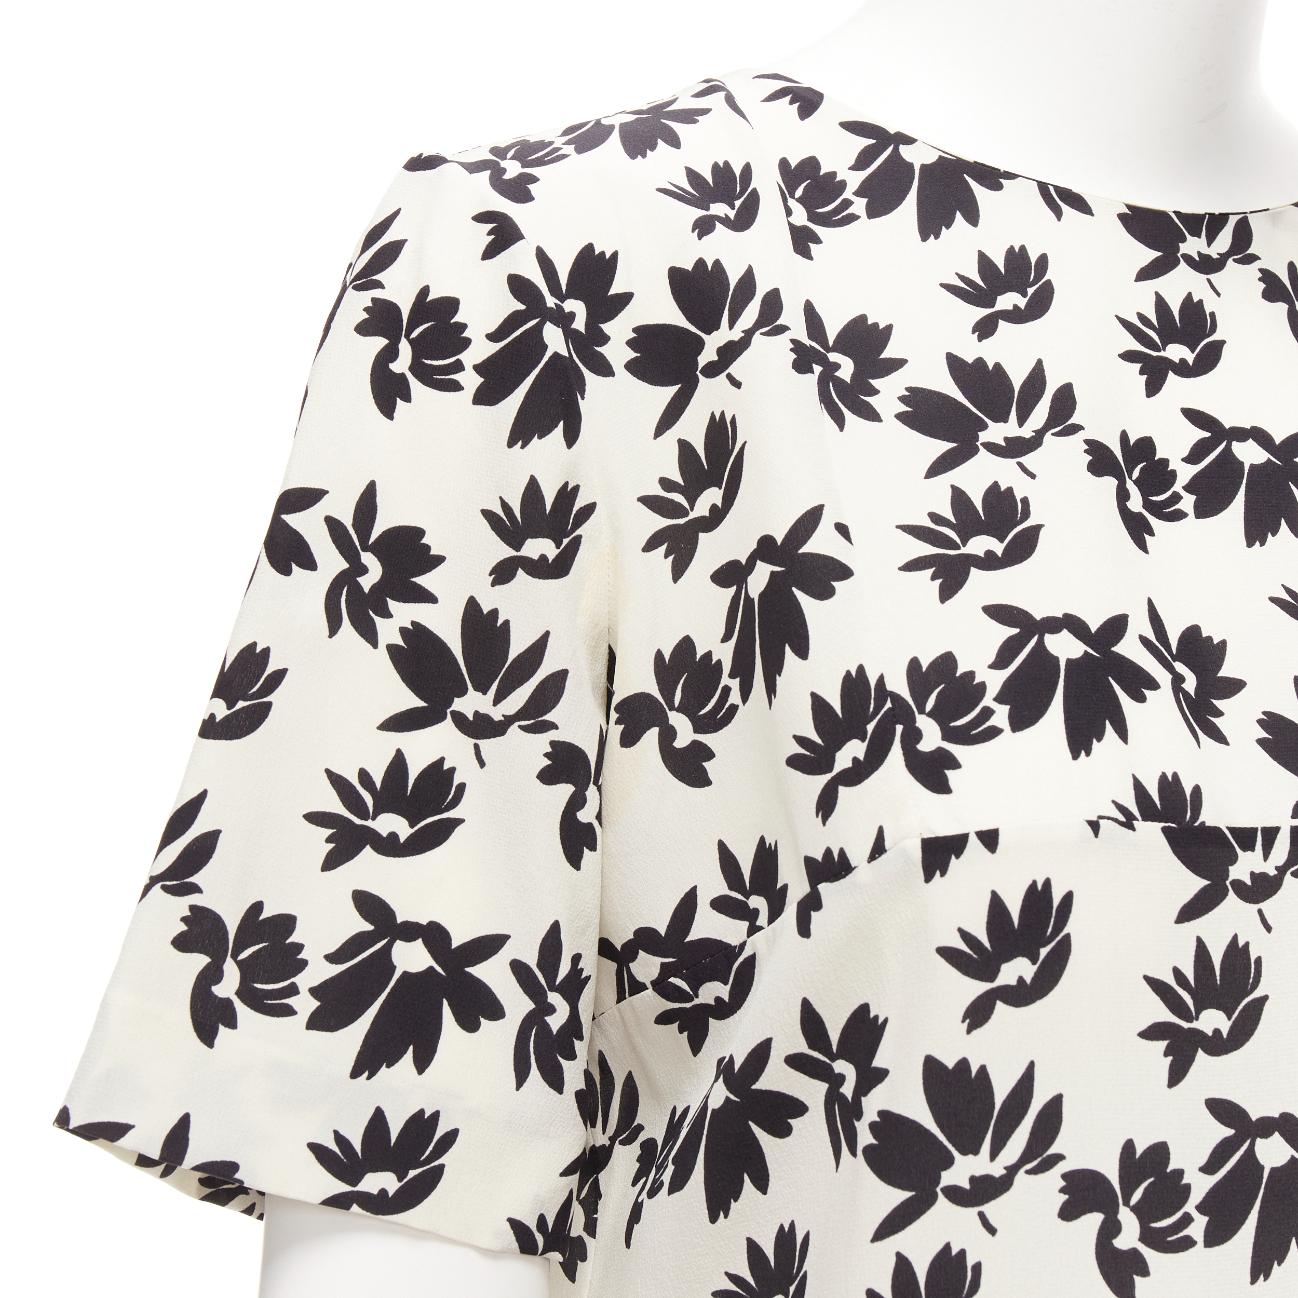 MARNI white black floral print asymmetric panel dress IT42 M
Reference: CELG/A00419
Brand: Marni
Material: Silk
Color: Black, White
Pattern: Floral
Closure: Zip
Extra Details: Back zip.
Made in: Italy

CONDITION:
Condition: Excellent, this item was